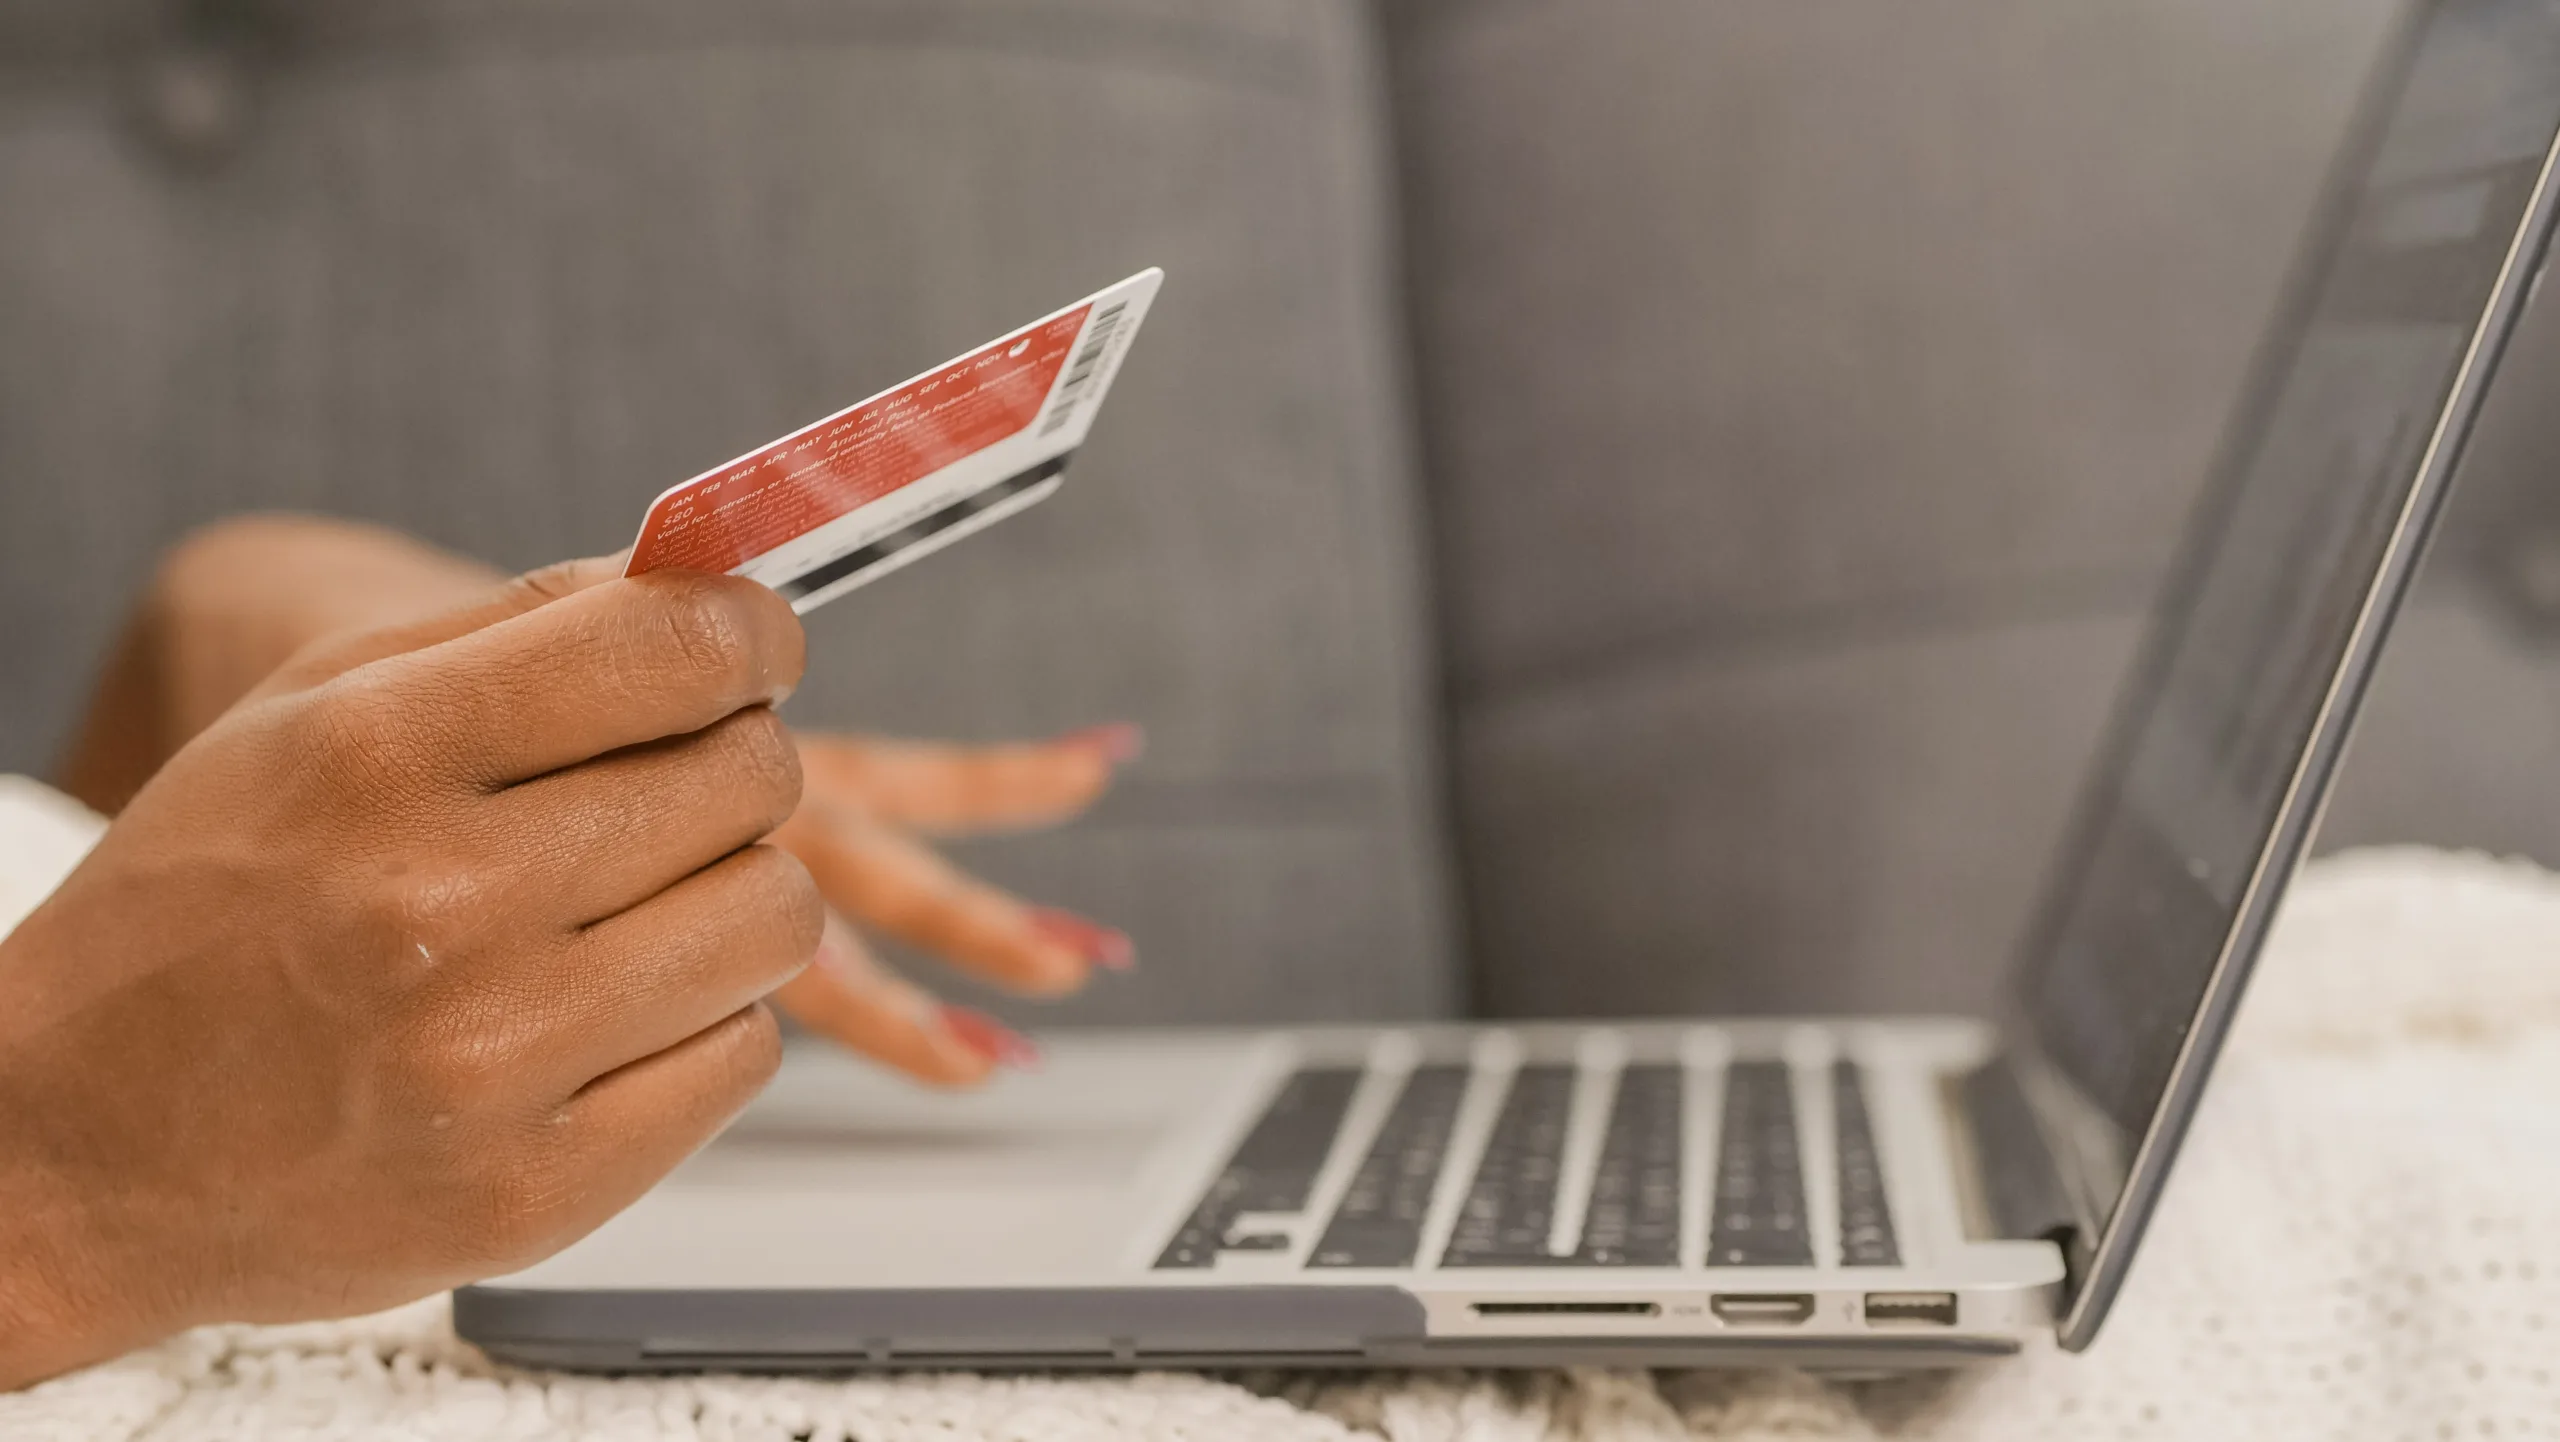 Online Purchase using a credit card